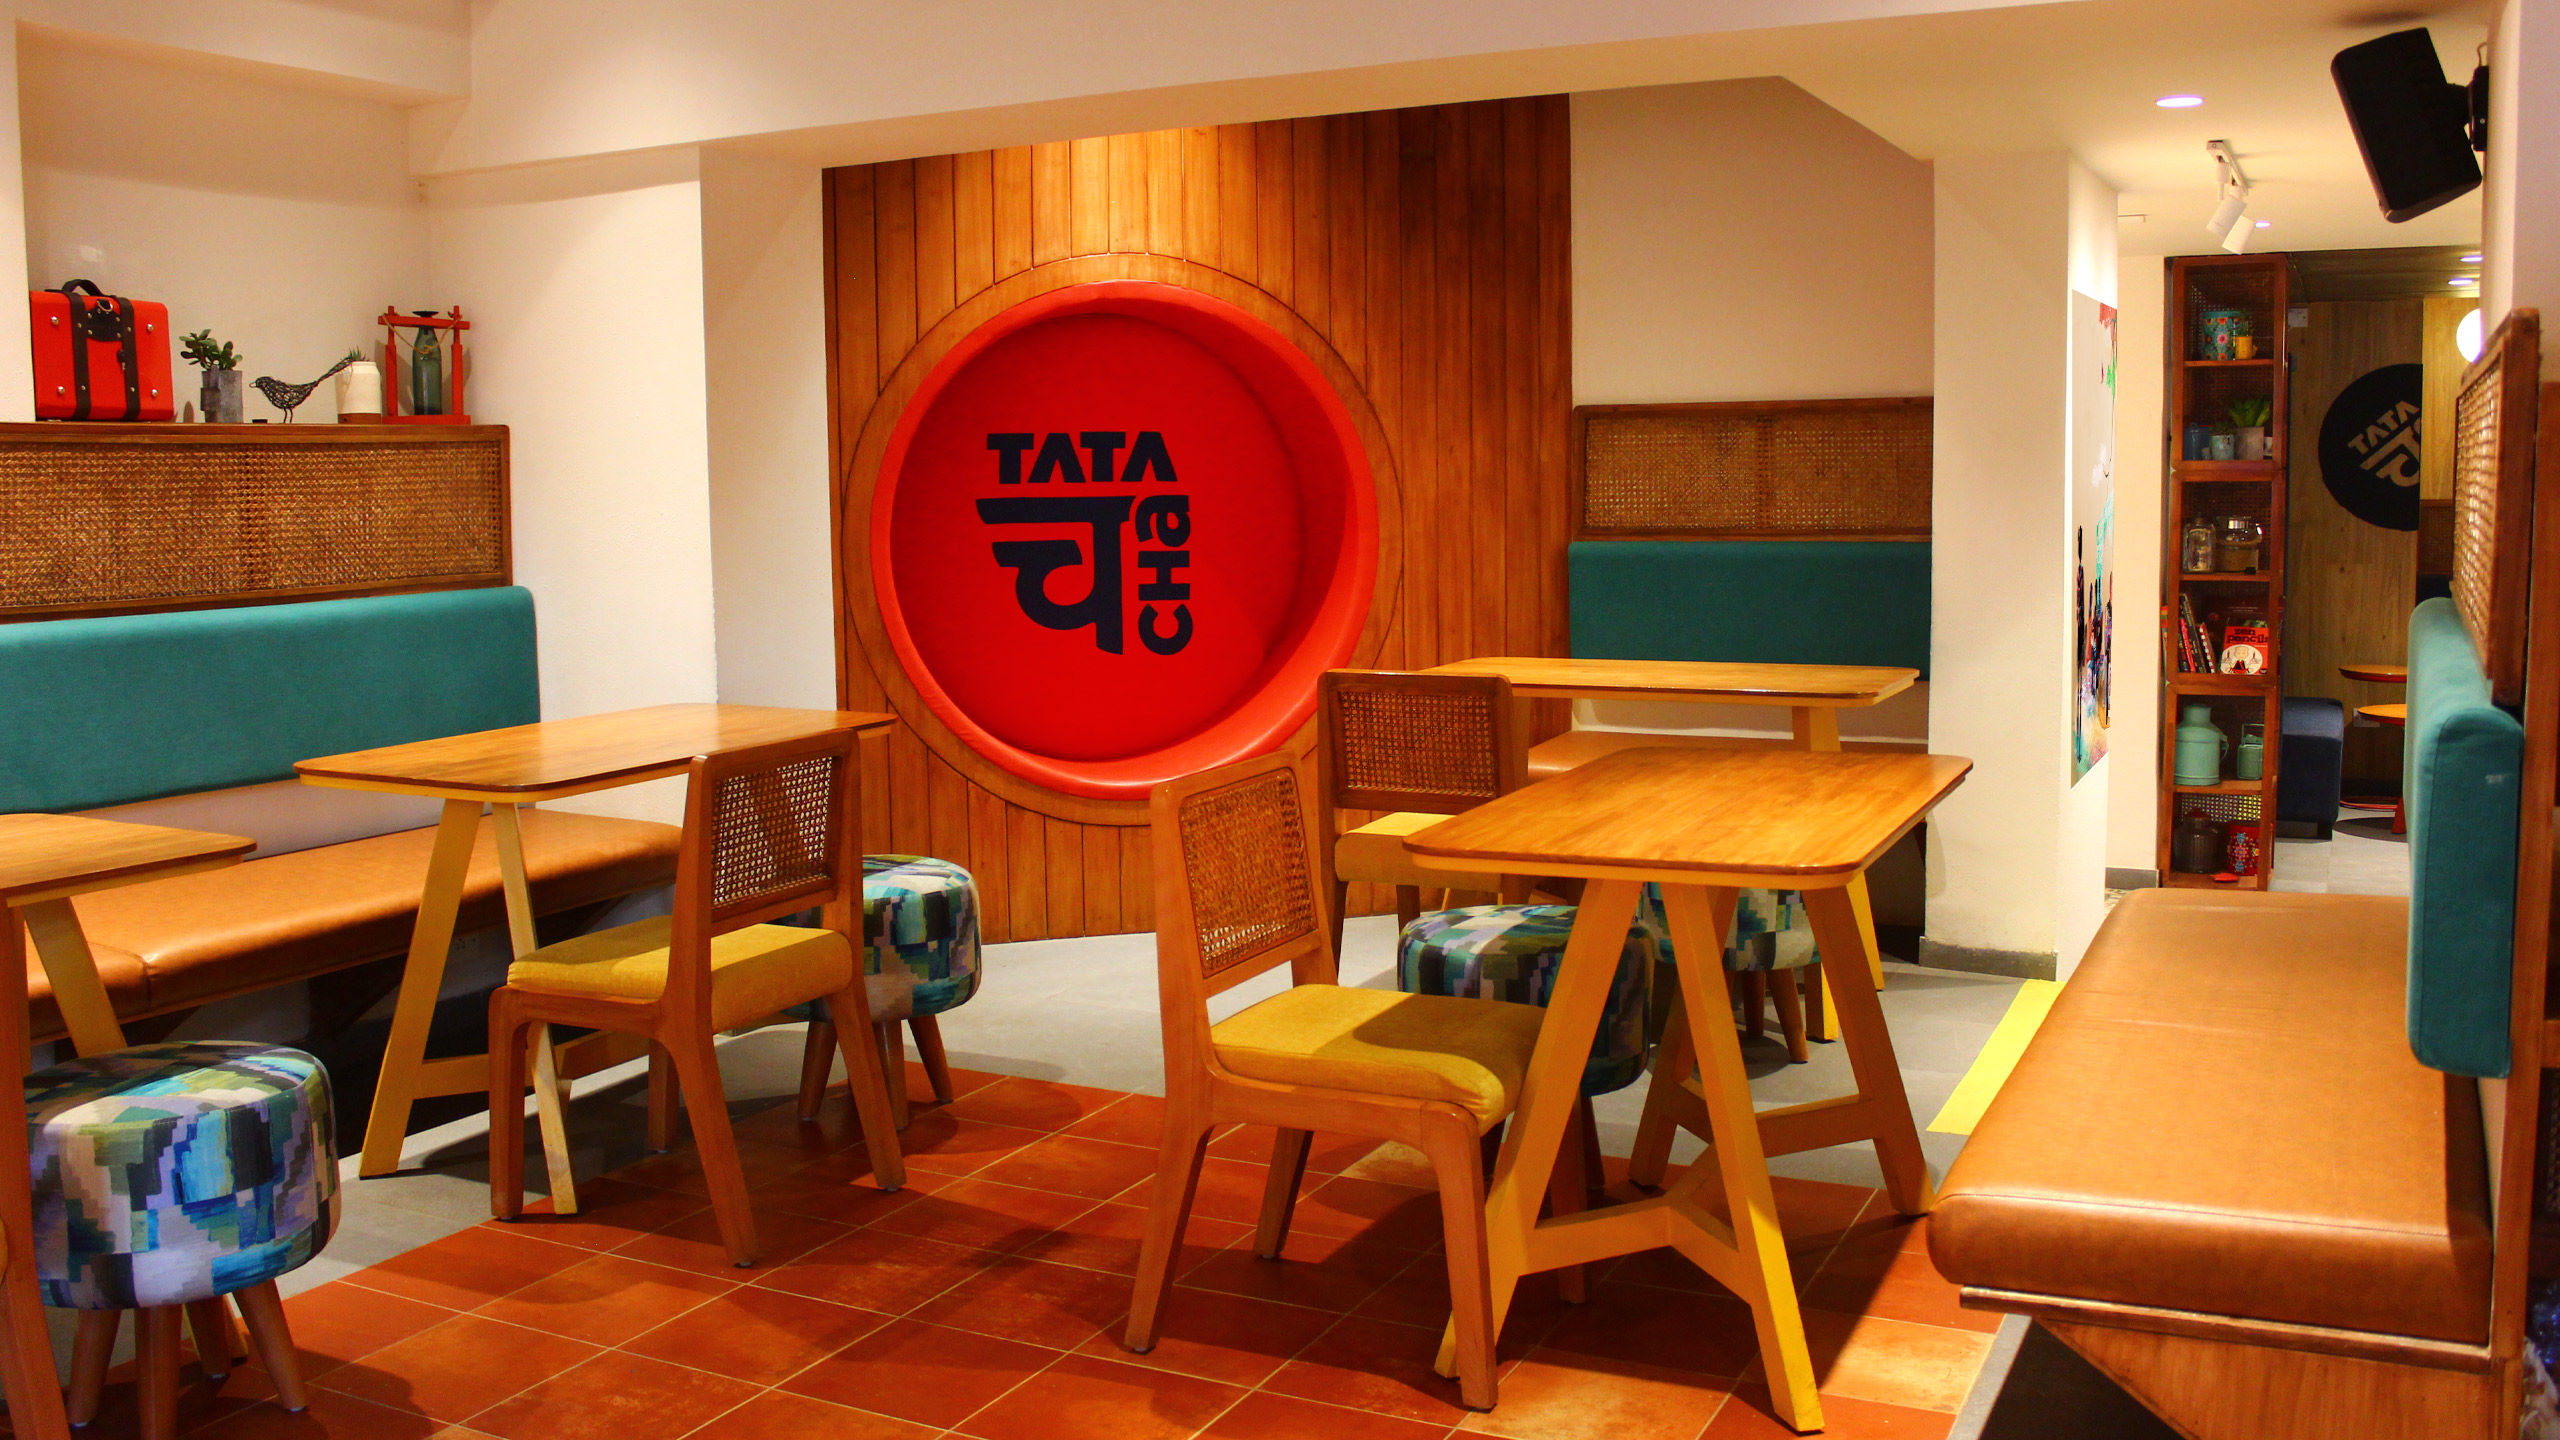 Tata Cha, Serving chai warmth, at an outlet near you!